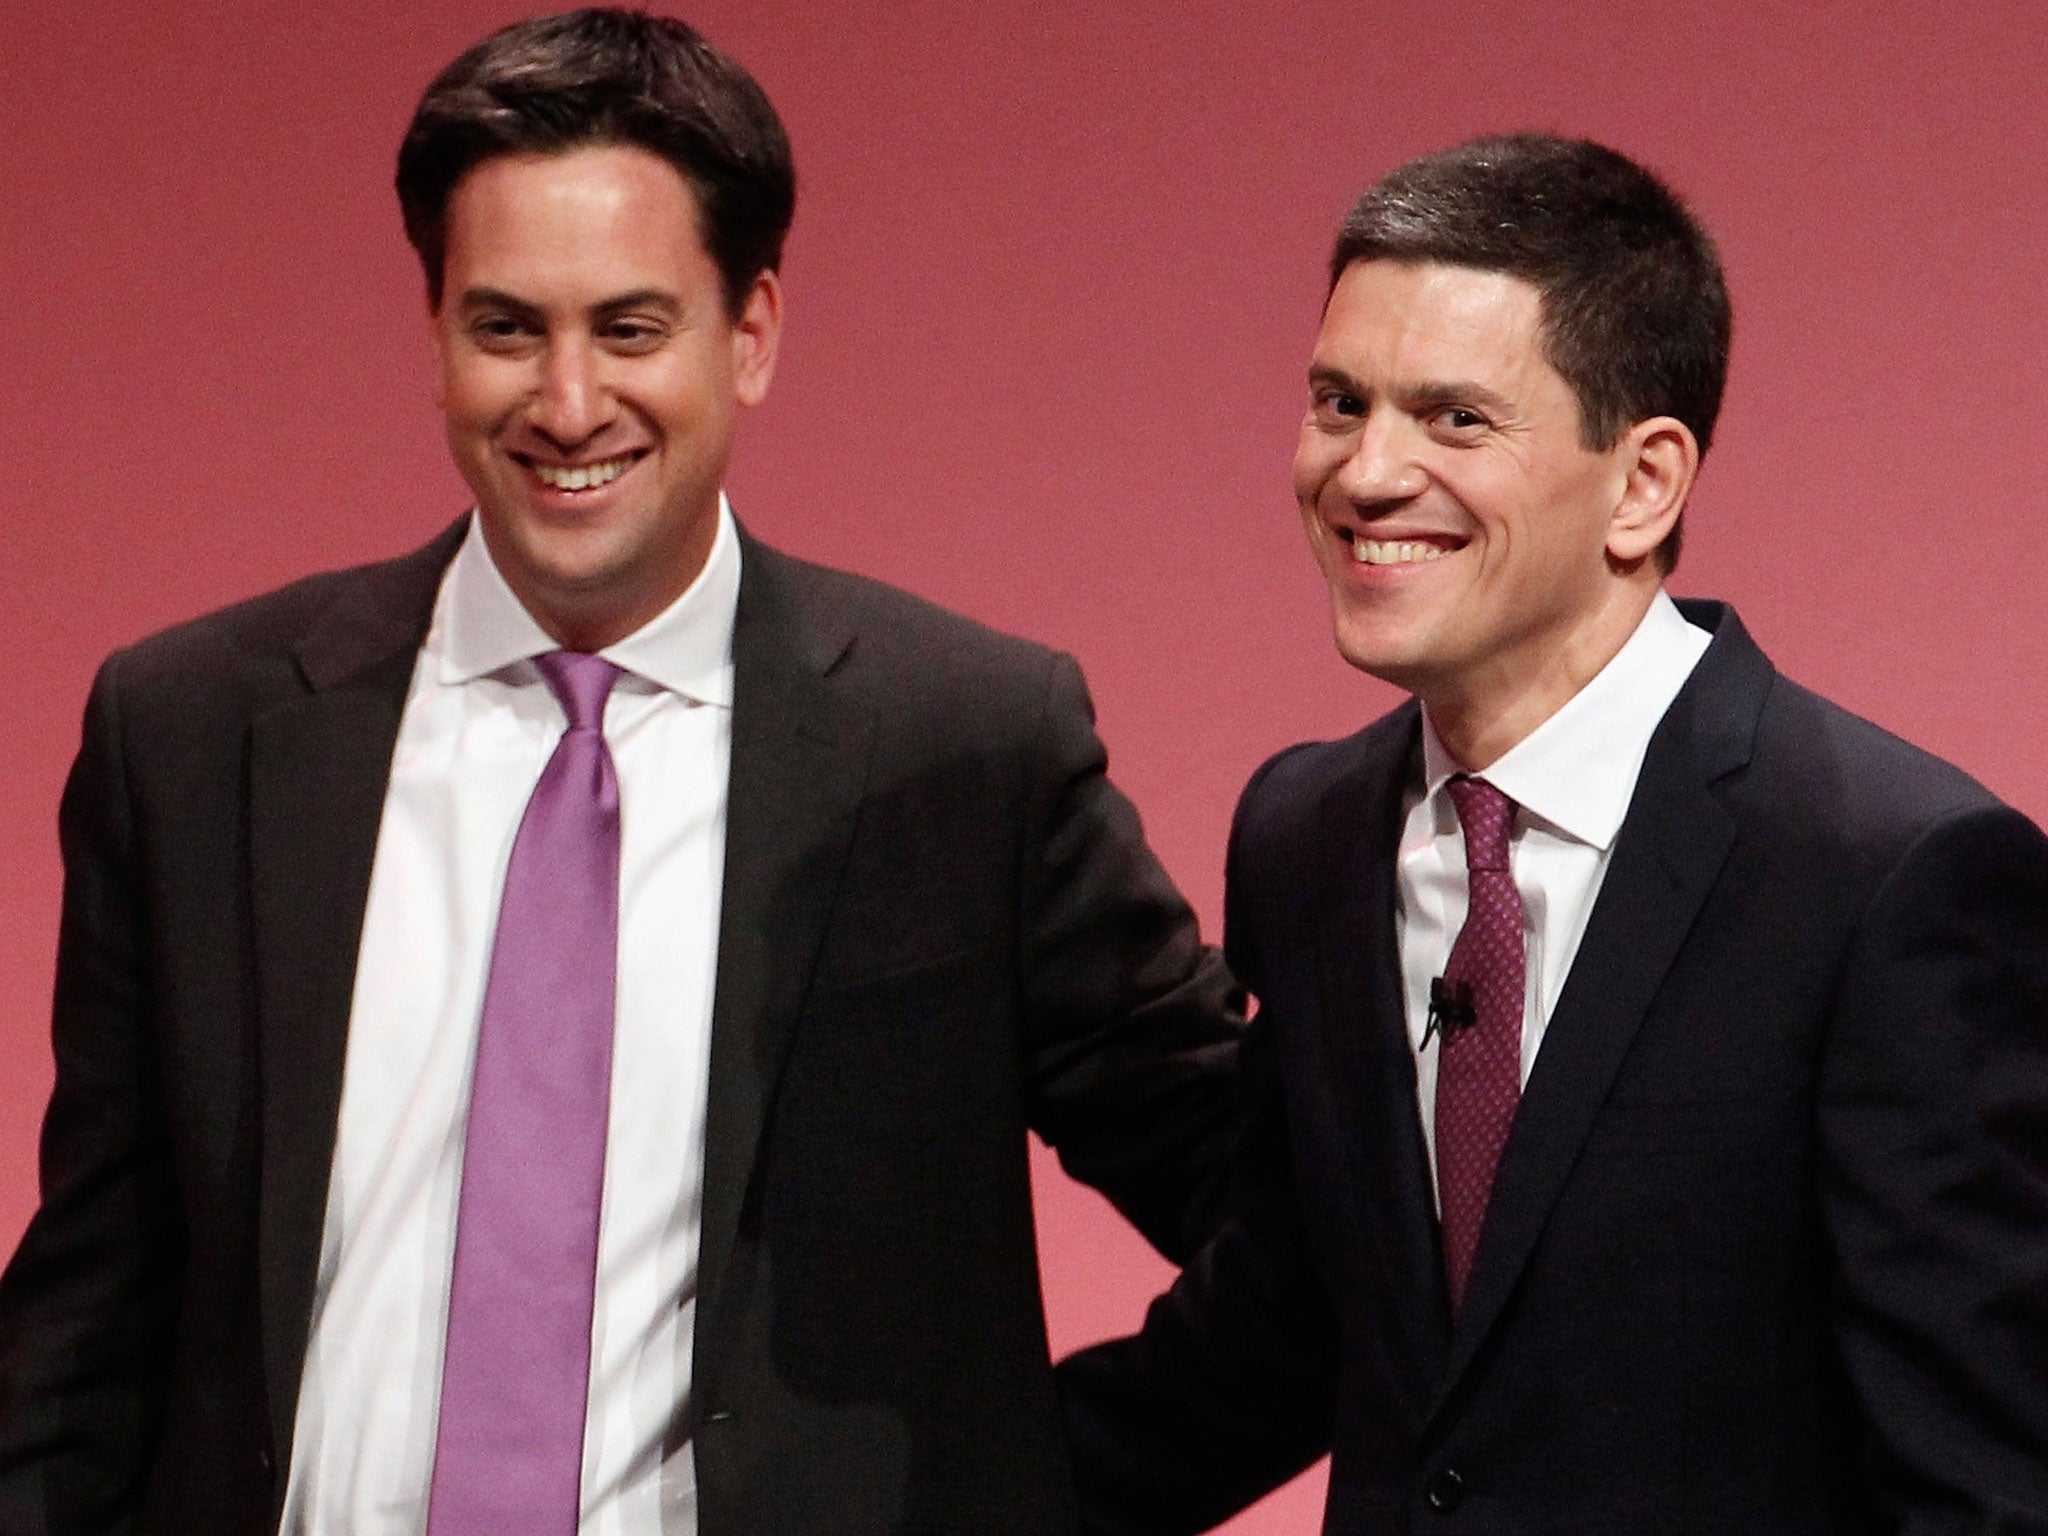 David Miliband with his brother, Labour leader Ed Miliband